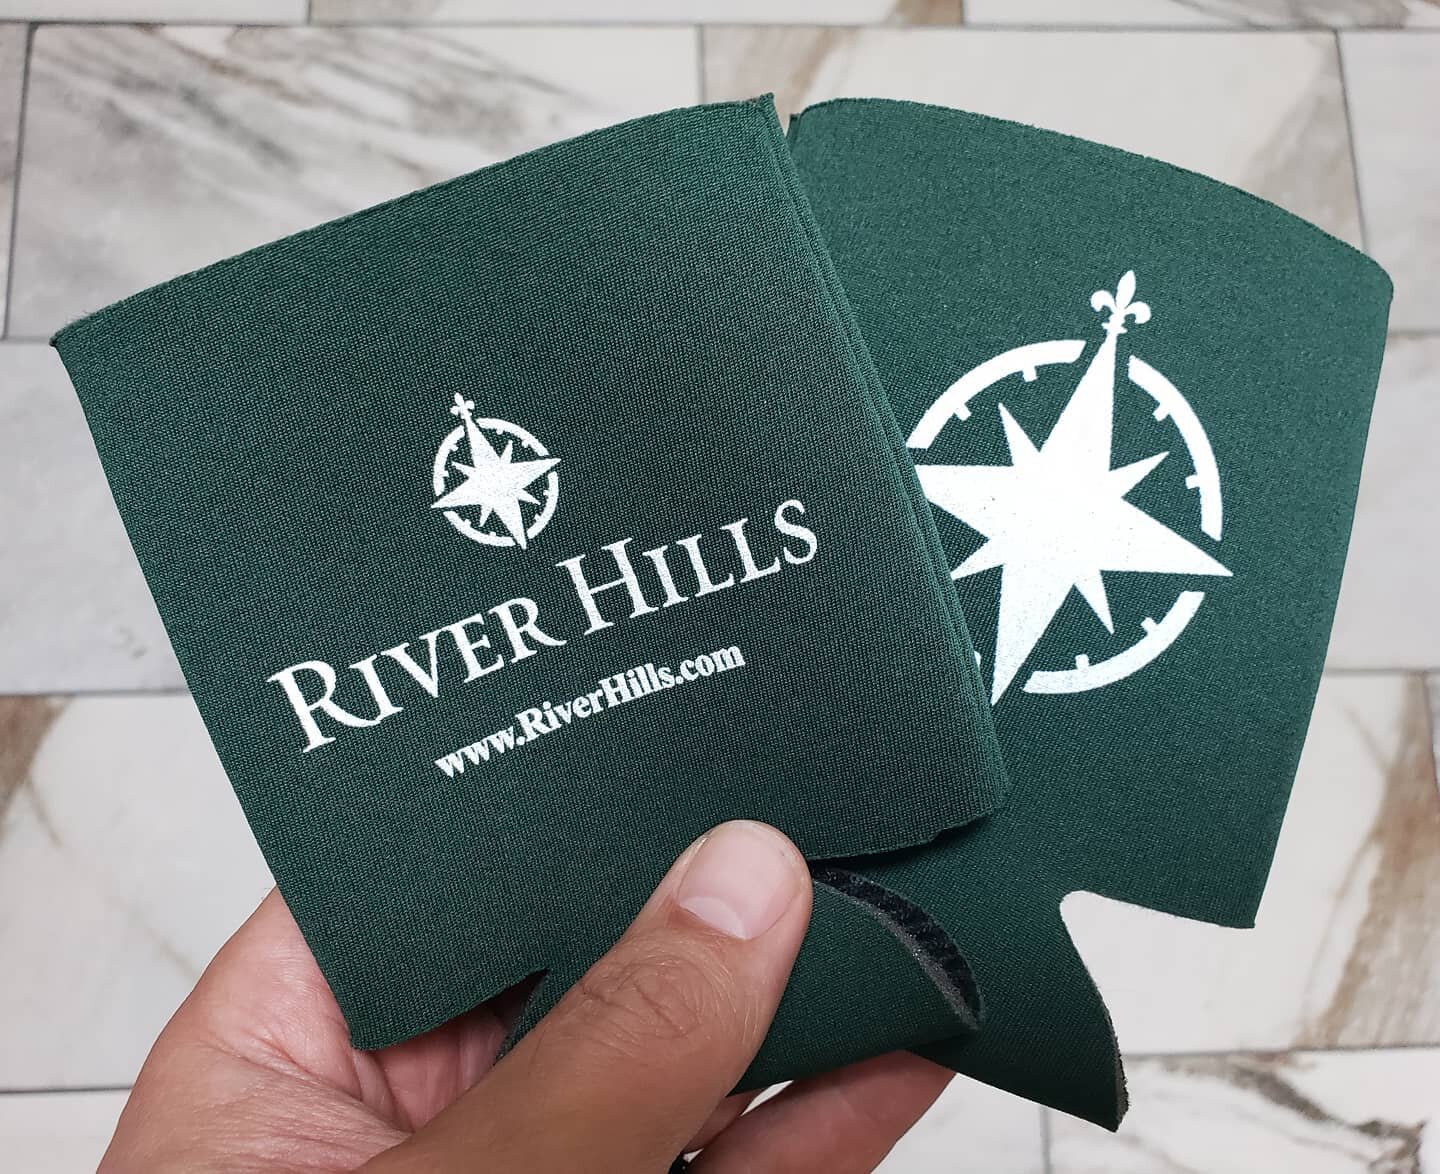 Next weekend River Hills residents and their guests will be treated to a free concert at the River Hills Marina (details in the May Neighbors).

While attending, don't forget to buy some new River Hills swag... $2 ea or 3 for $5 (cash only). All proc